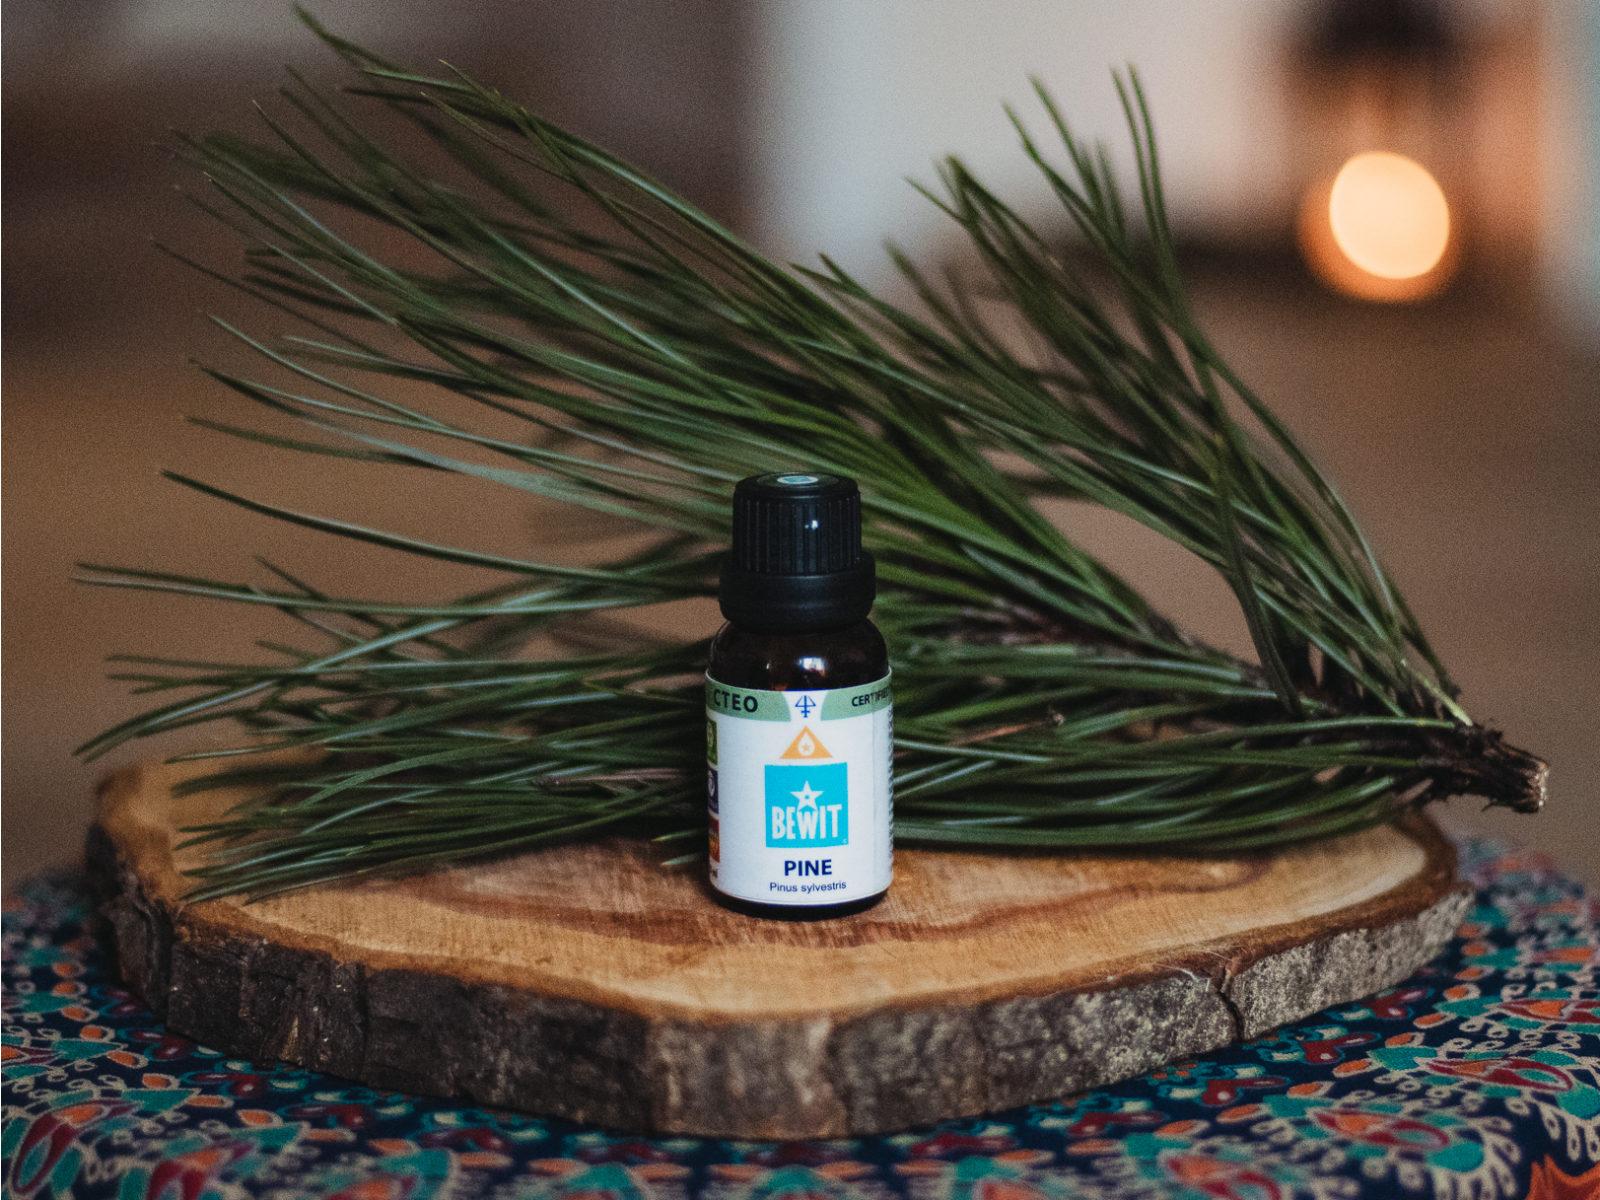 BEWIT Pine - This is a 100% pure essential oil - 6